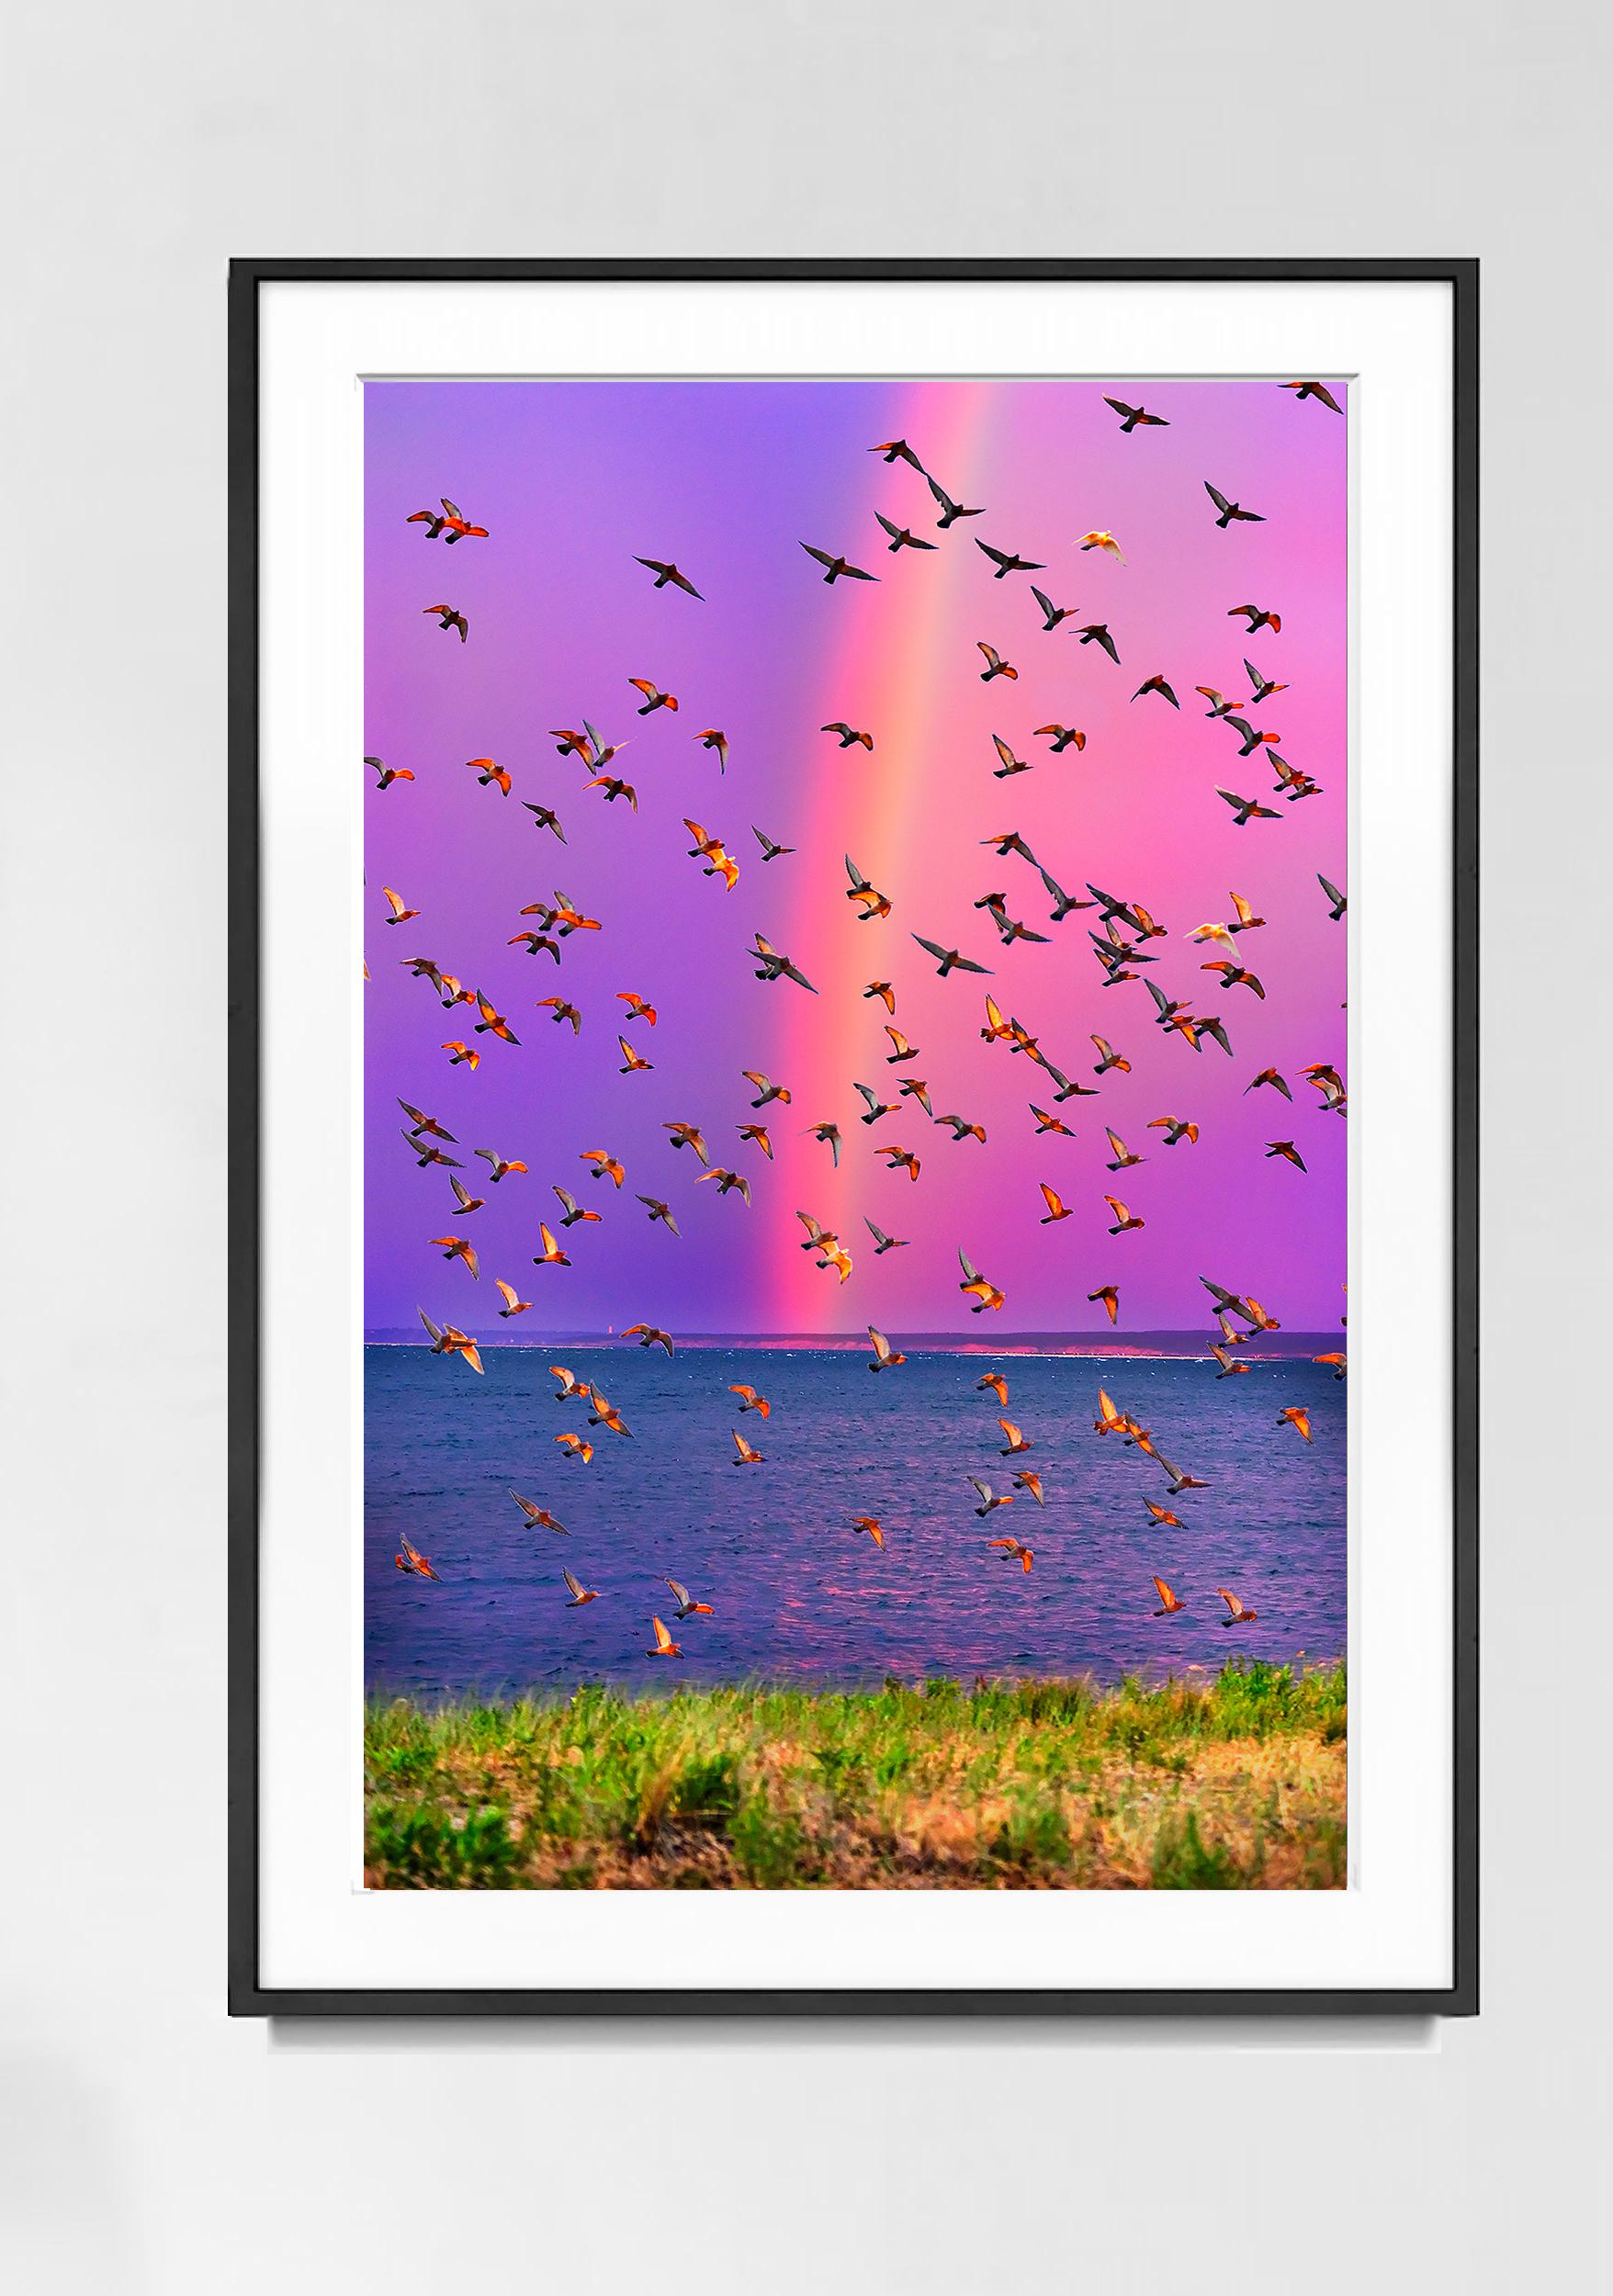 Rainbow in East Hampton with a Celebrating Flock of Birds  - Magenta Sky - Photograph by Mitchell Funk